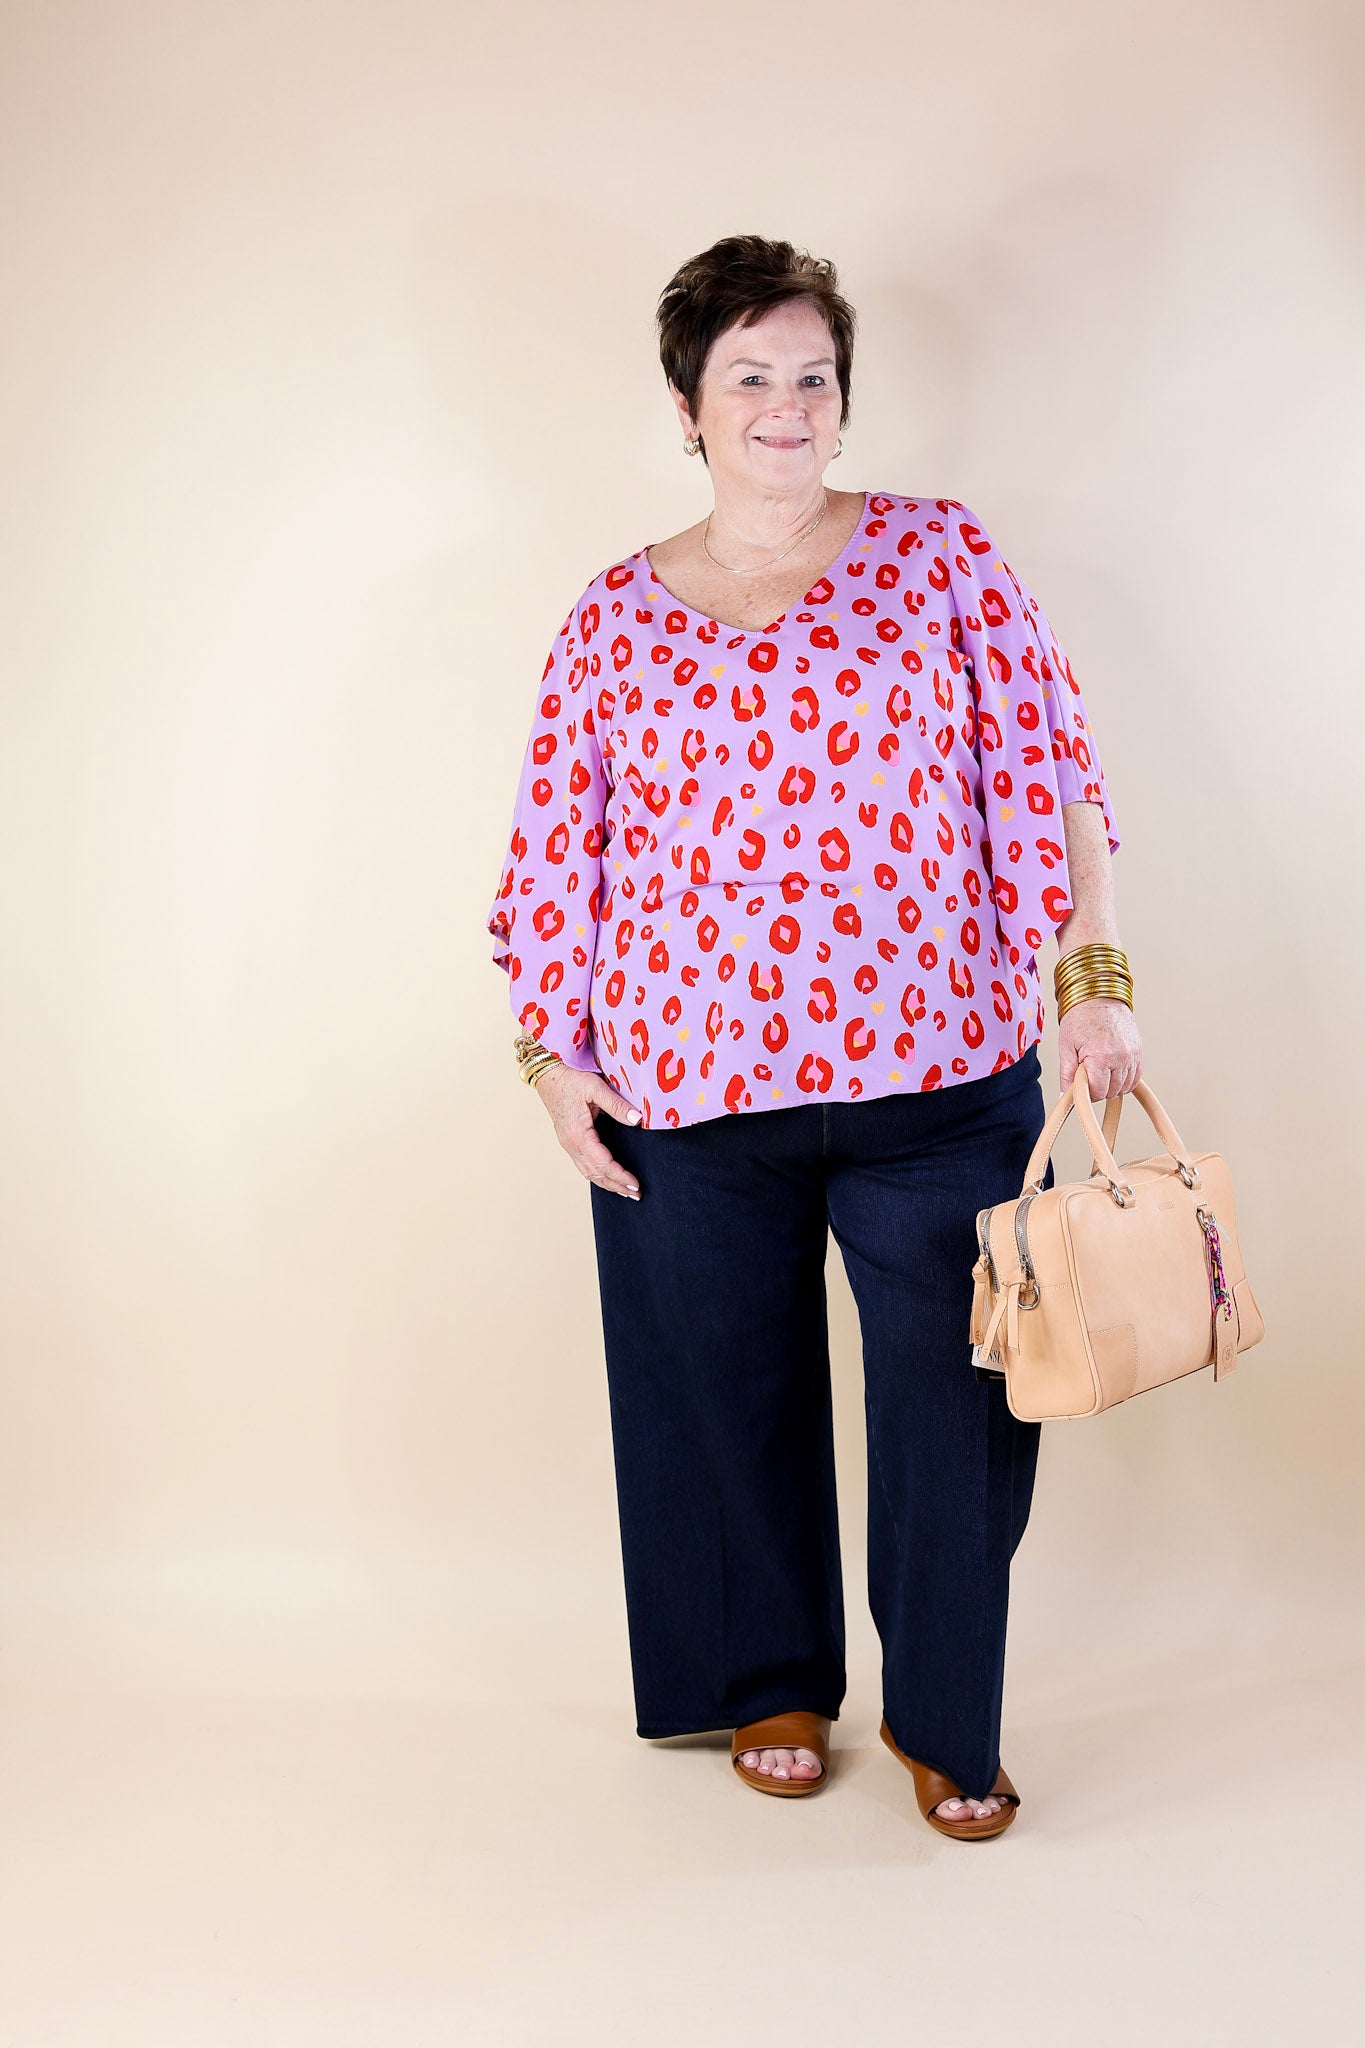 Radiant Glow V Neck Leopard Print Top with Flowy Sleeves in Purple - Giddy Up Glamour Boutique